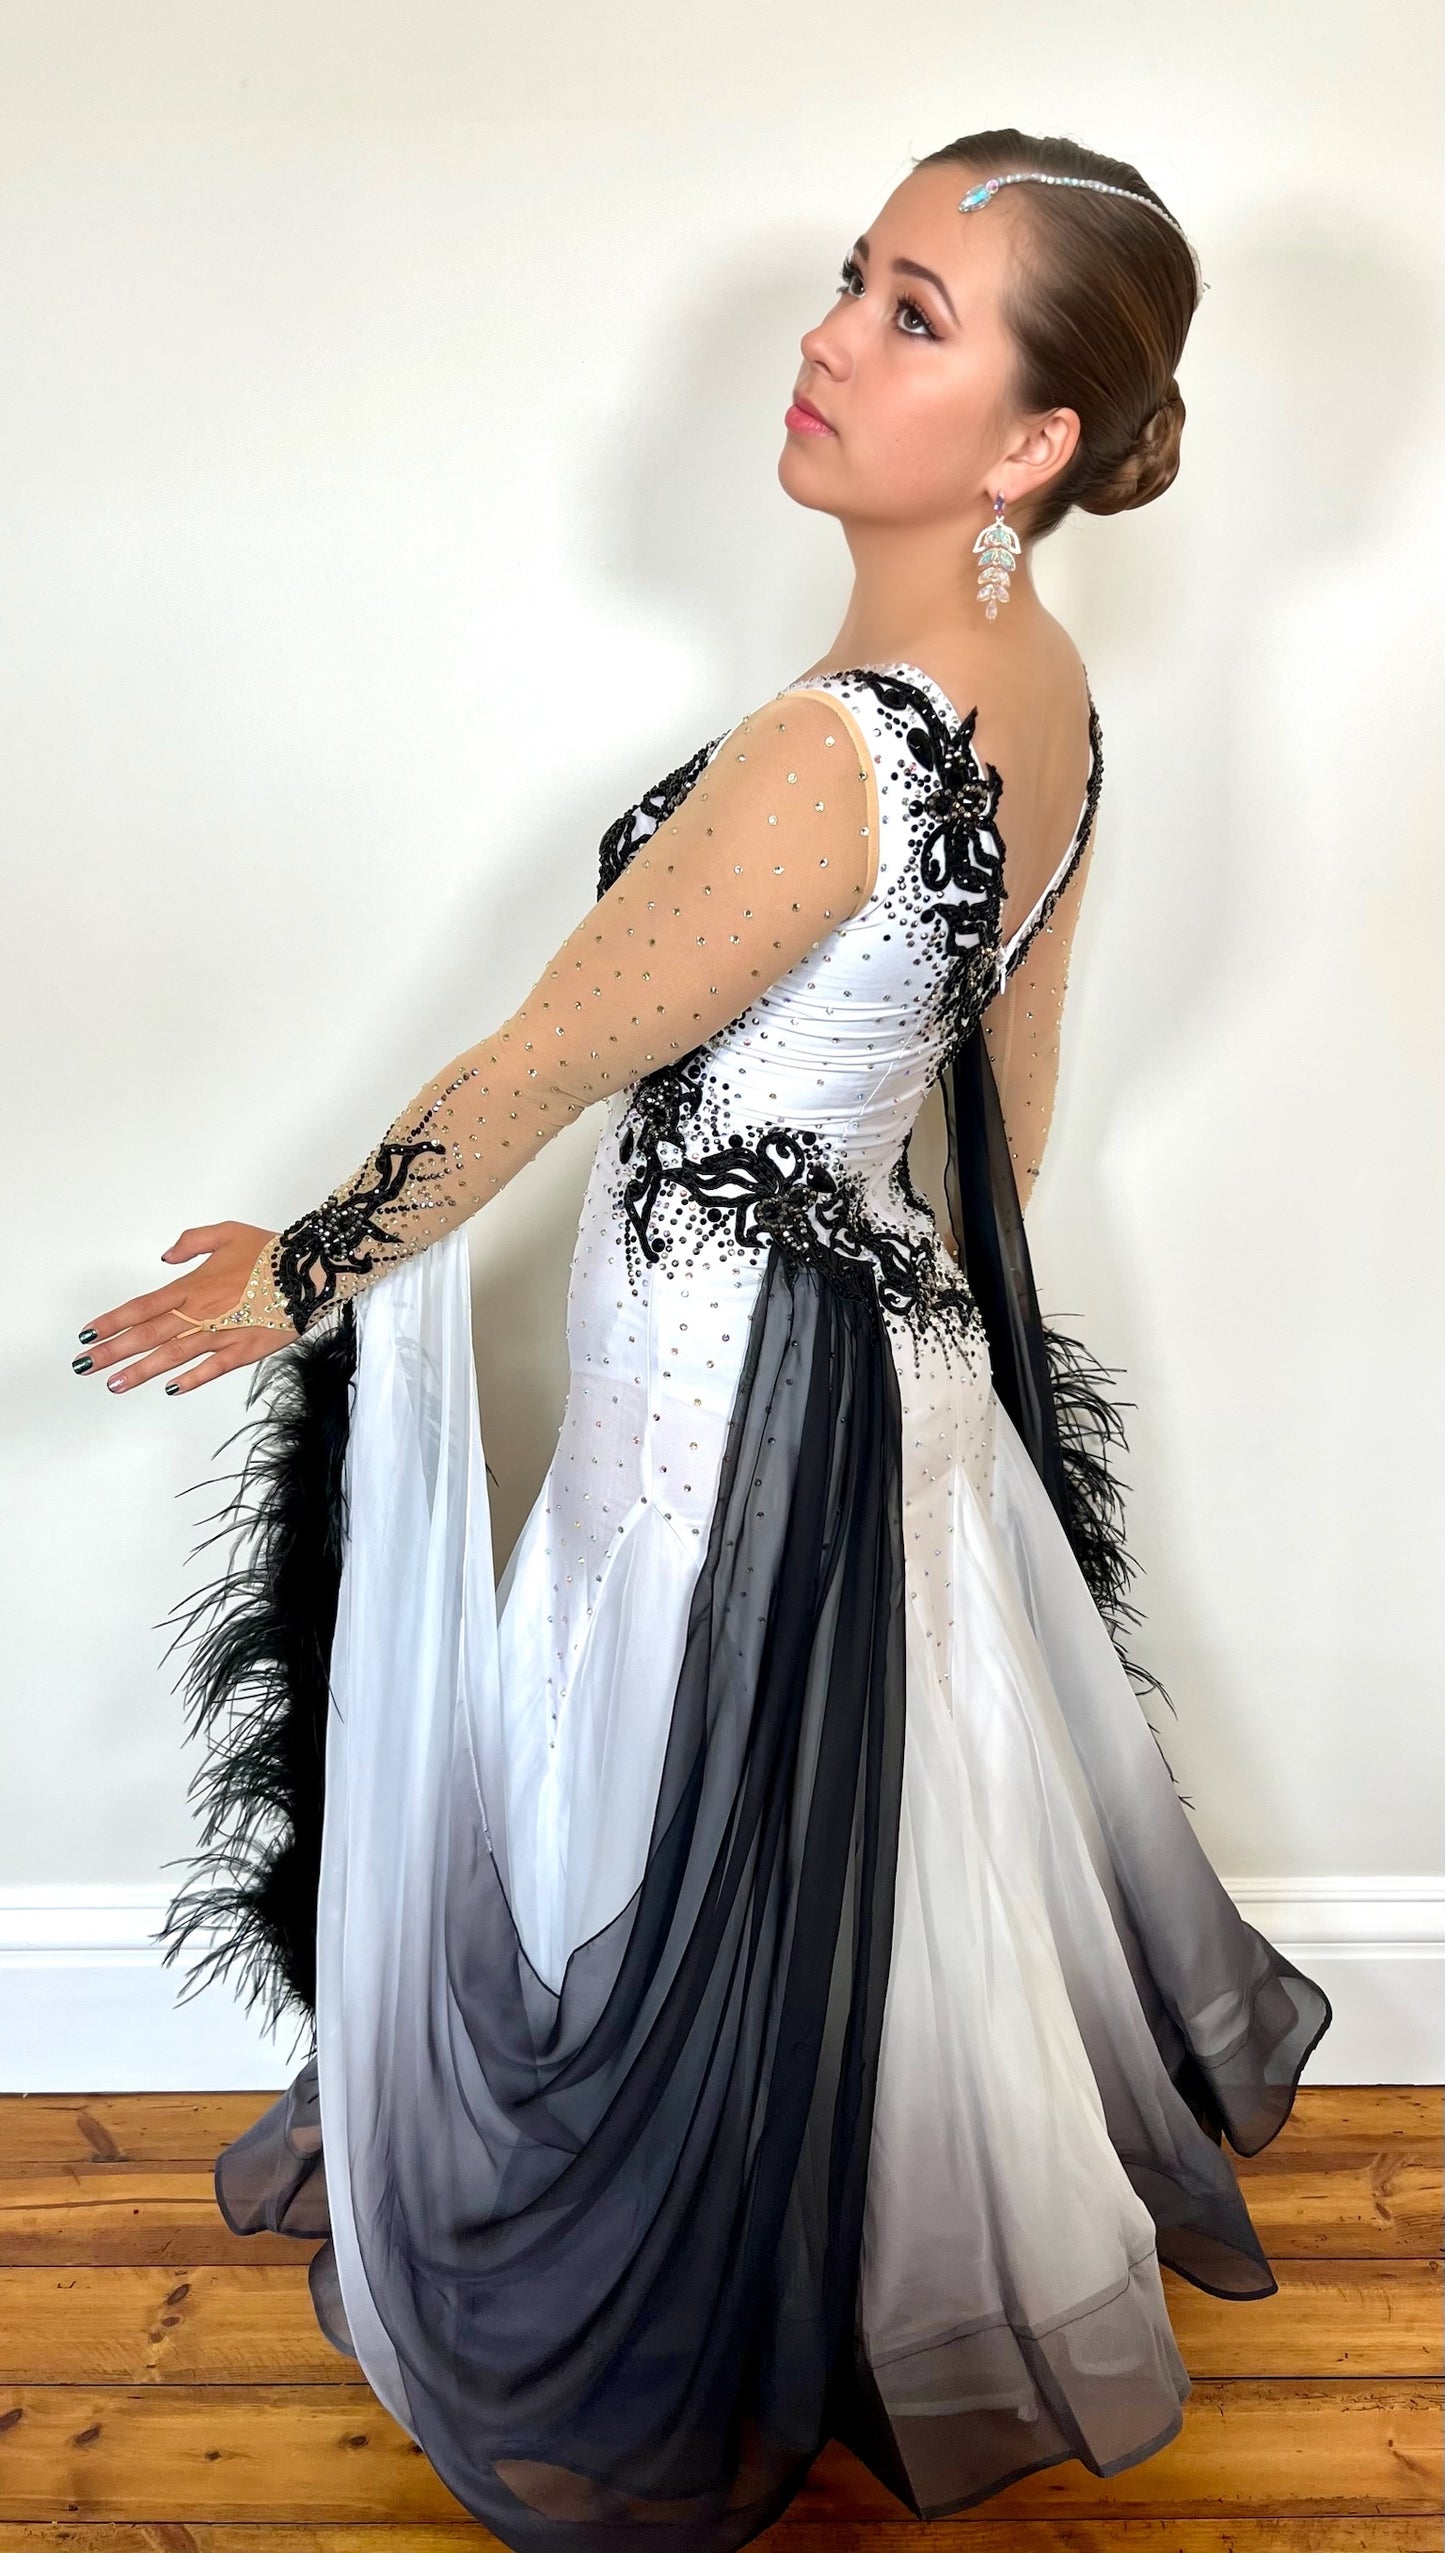 007 Black & White Ombré Ballroom Dress. Black ostrich feather float decoration with Ombré floats. Decorated with black appliqué & AB and jet stones.